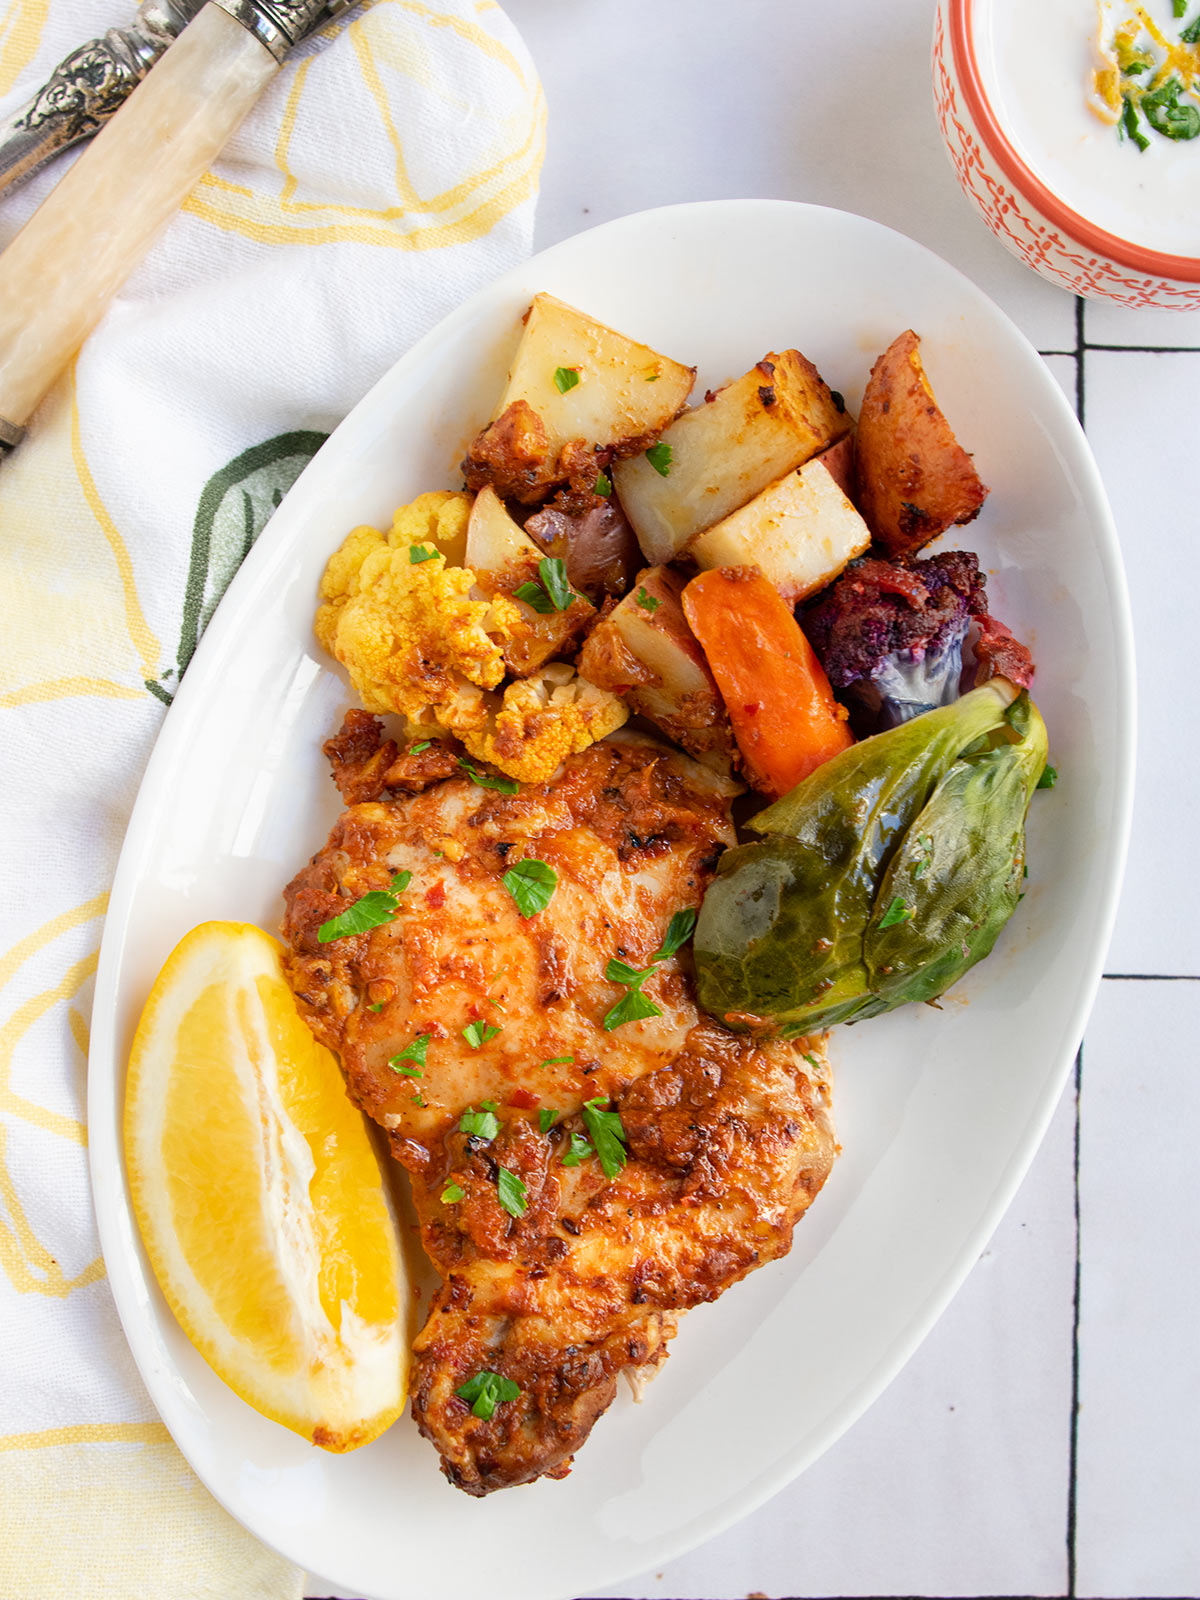 As part of Rosh hashanah food ideas post, a white plate showing harissa chicken and vegetables to introduce the chicken section of the post.